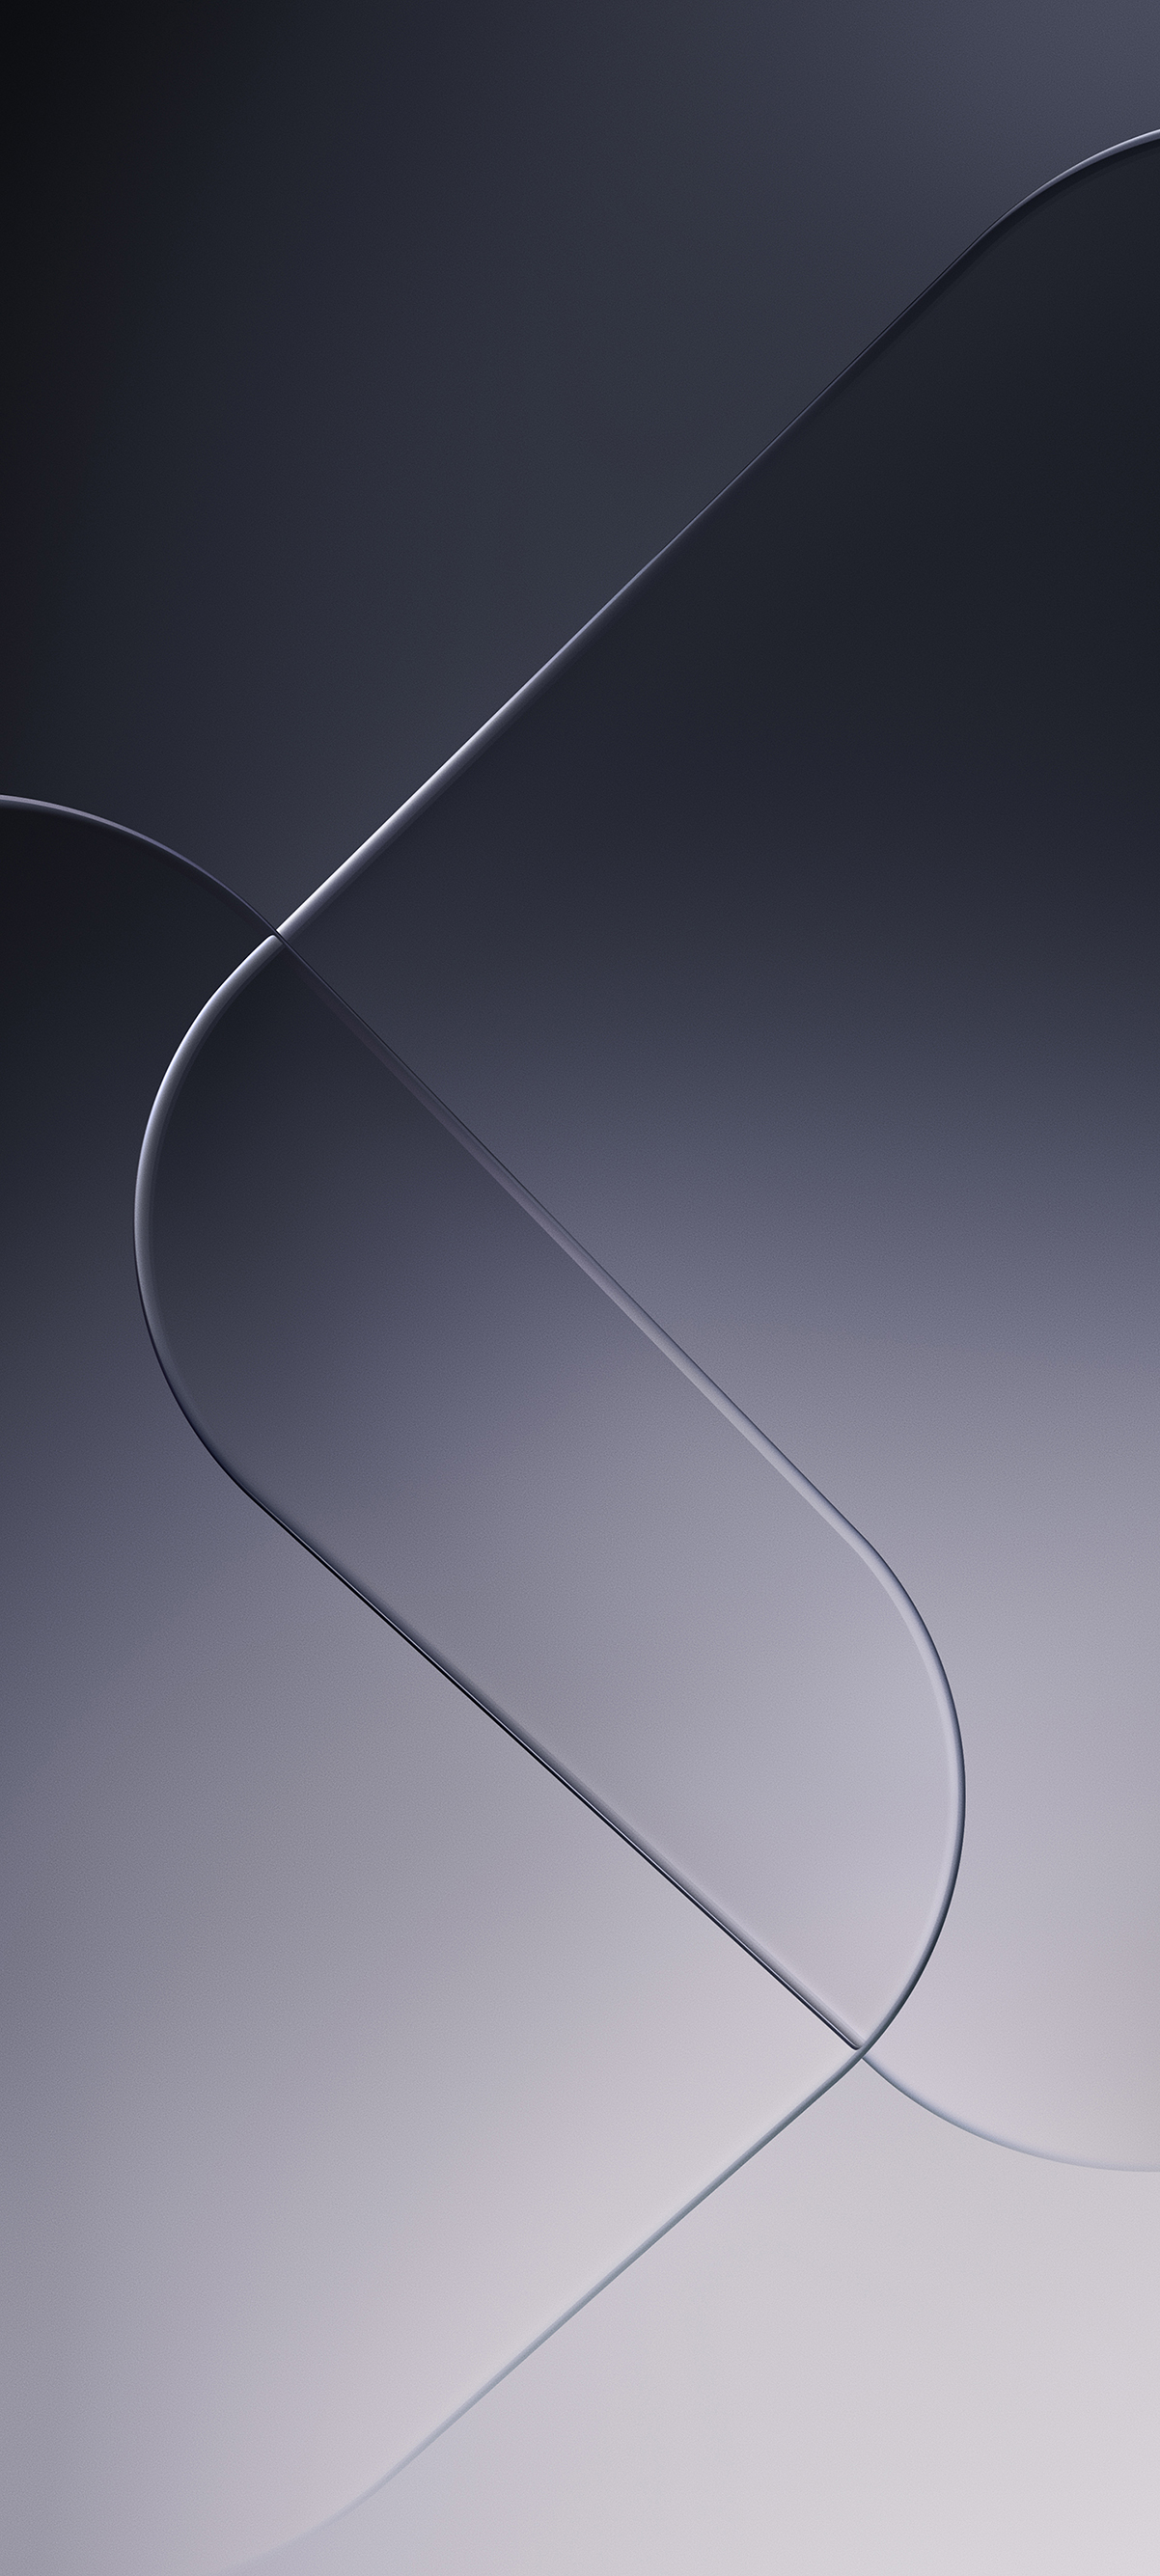 Download MIUI 11 Stock Wallpapers - ZIP File Included